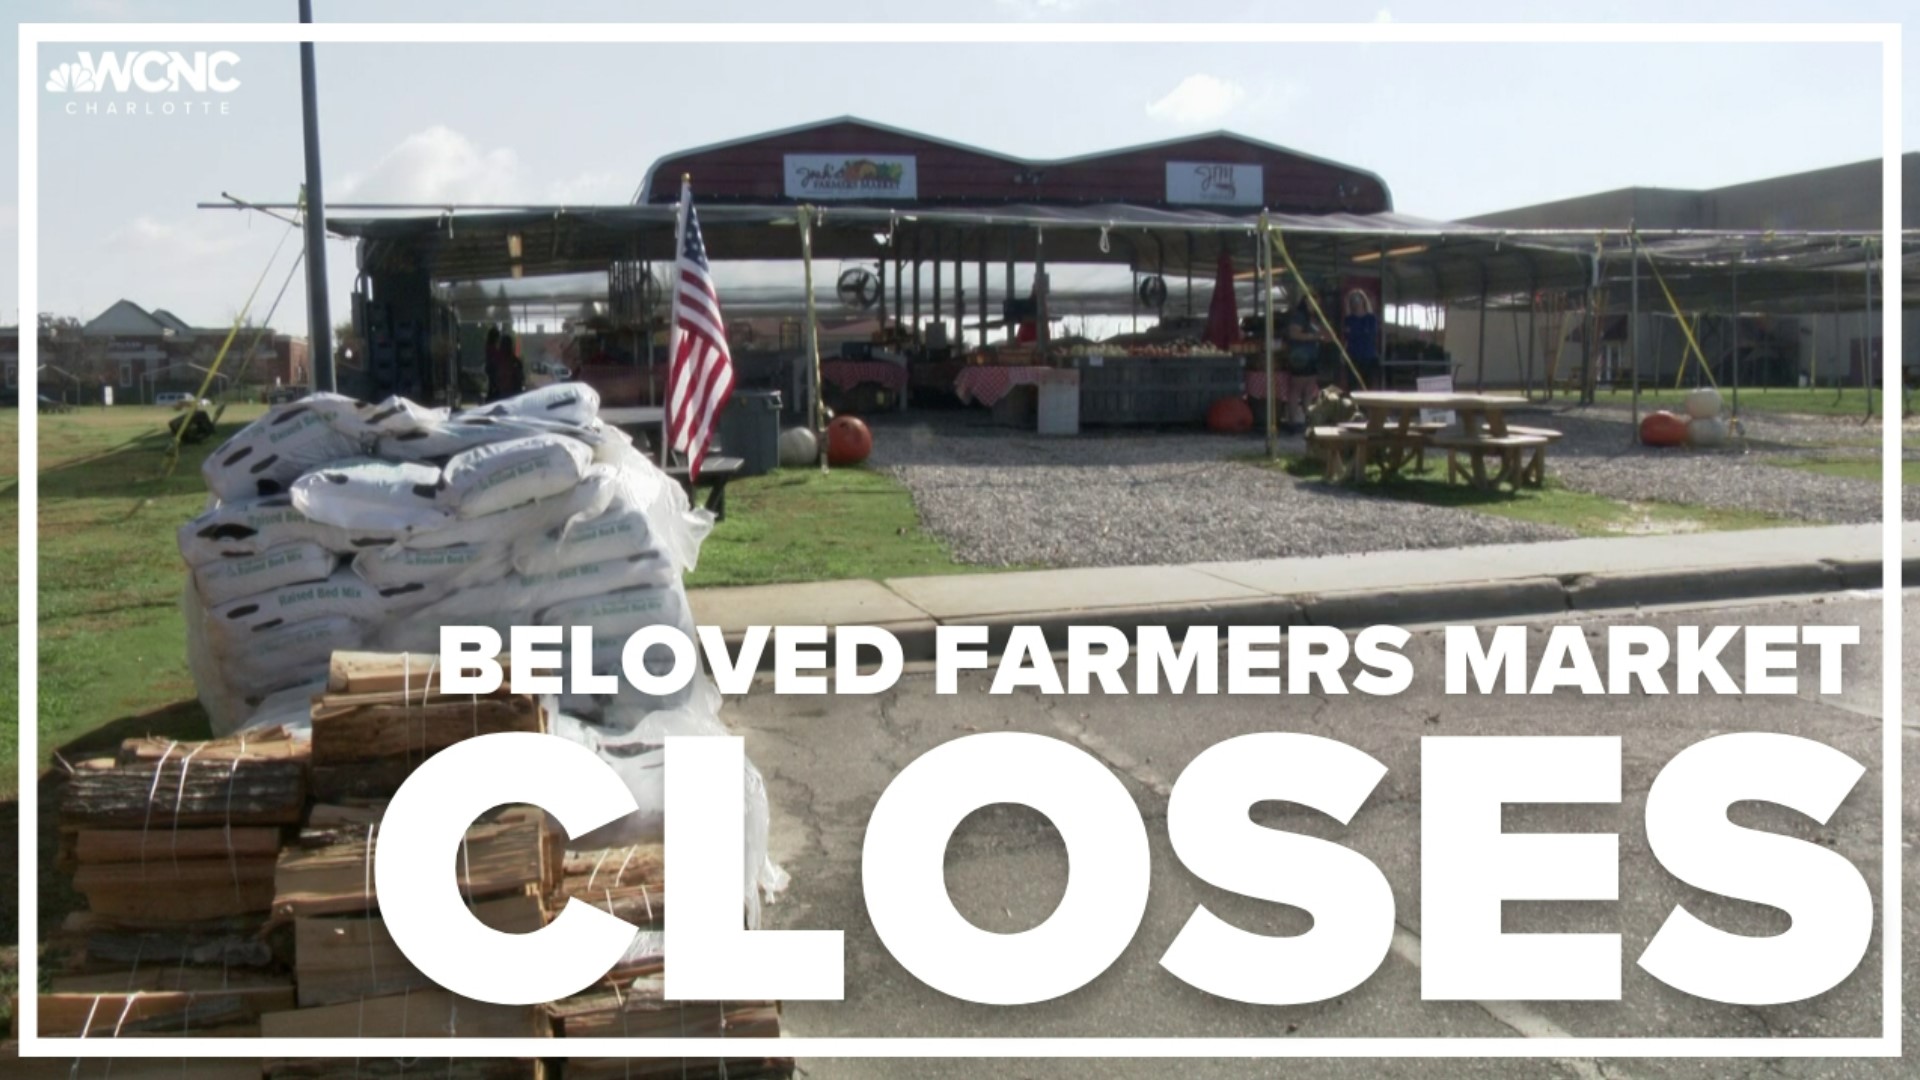 Josh's Farmers Market in Mooresville officially closed last week after violating a new town ordinance.